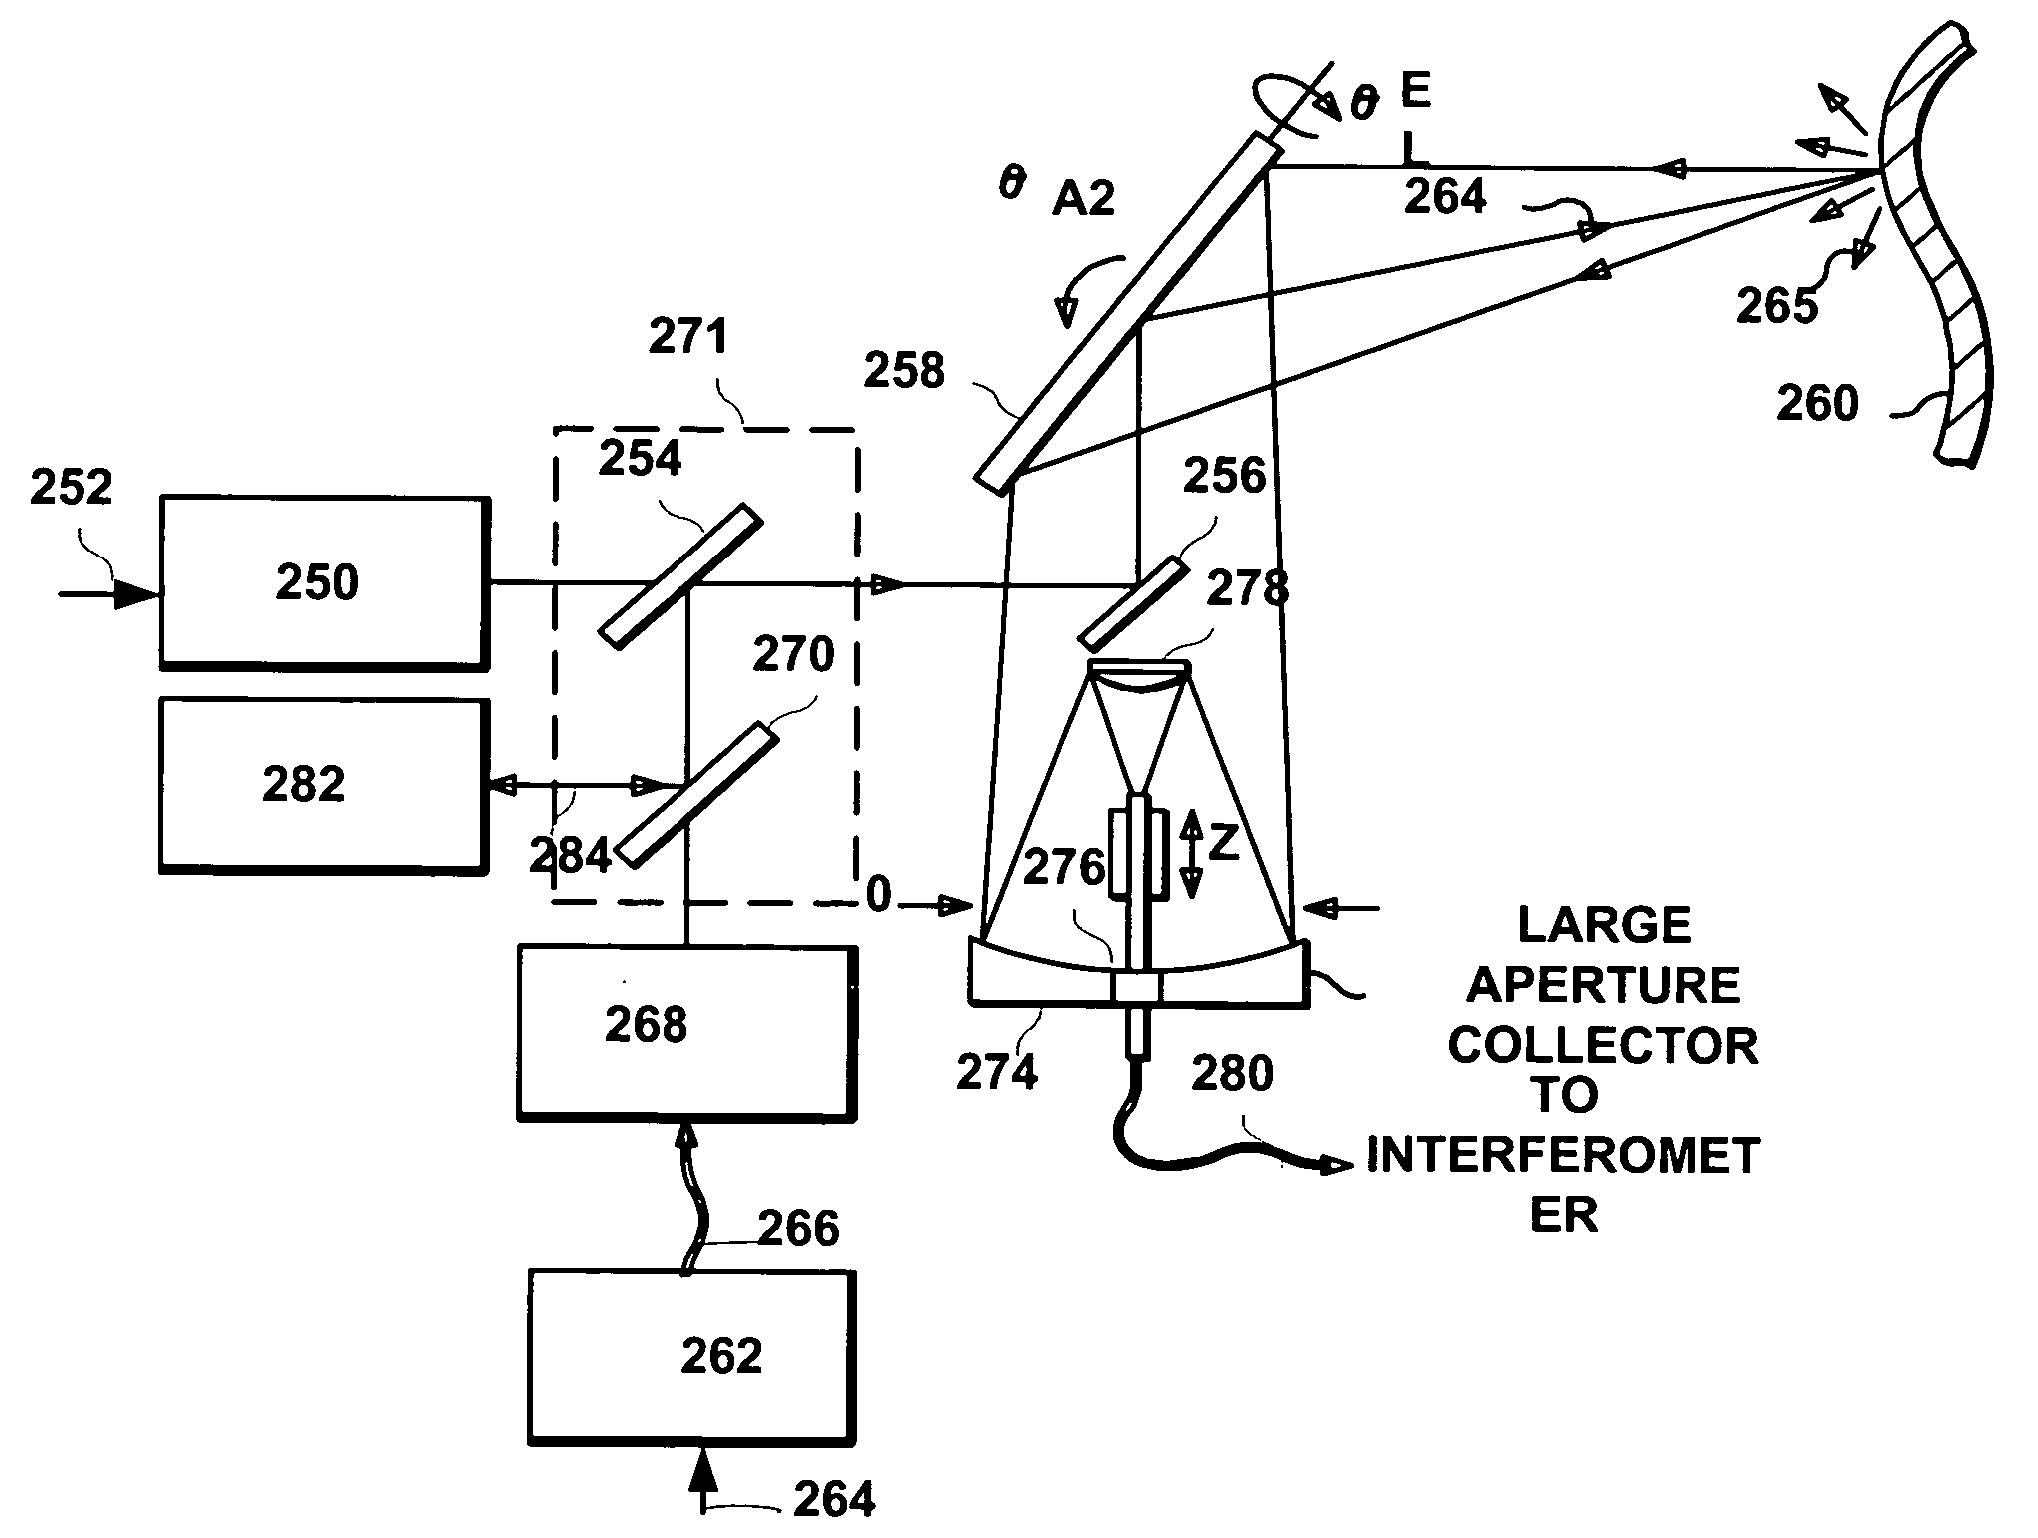 System and method to reduce laser noise for improved interferometric laser ultrasound detection